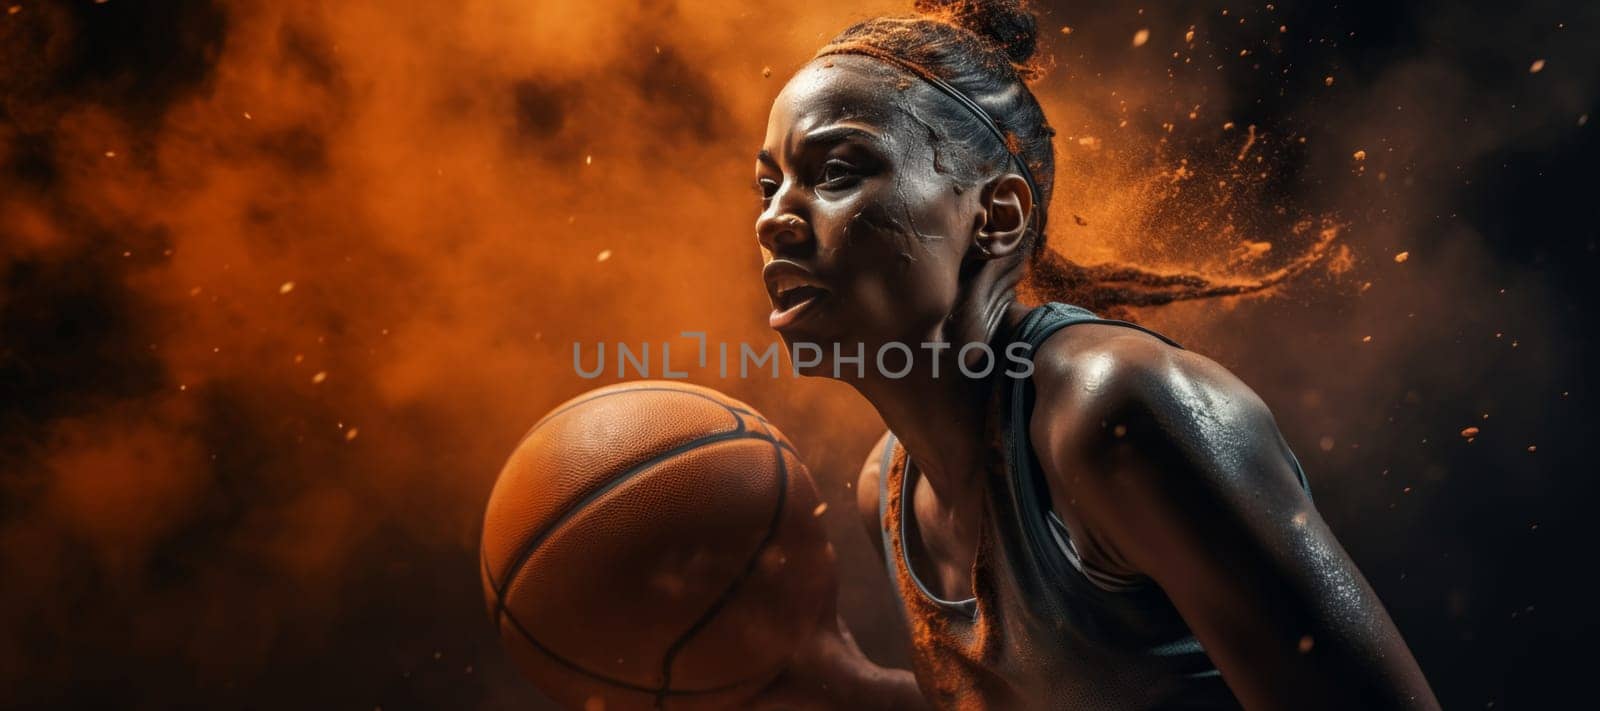 An intense moment as a female basketball player in motion exhibits concentration and skill during a game, with a striking orange fiery backdrop.